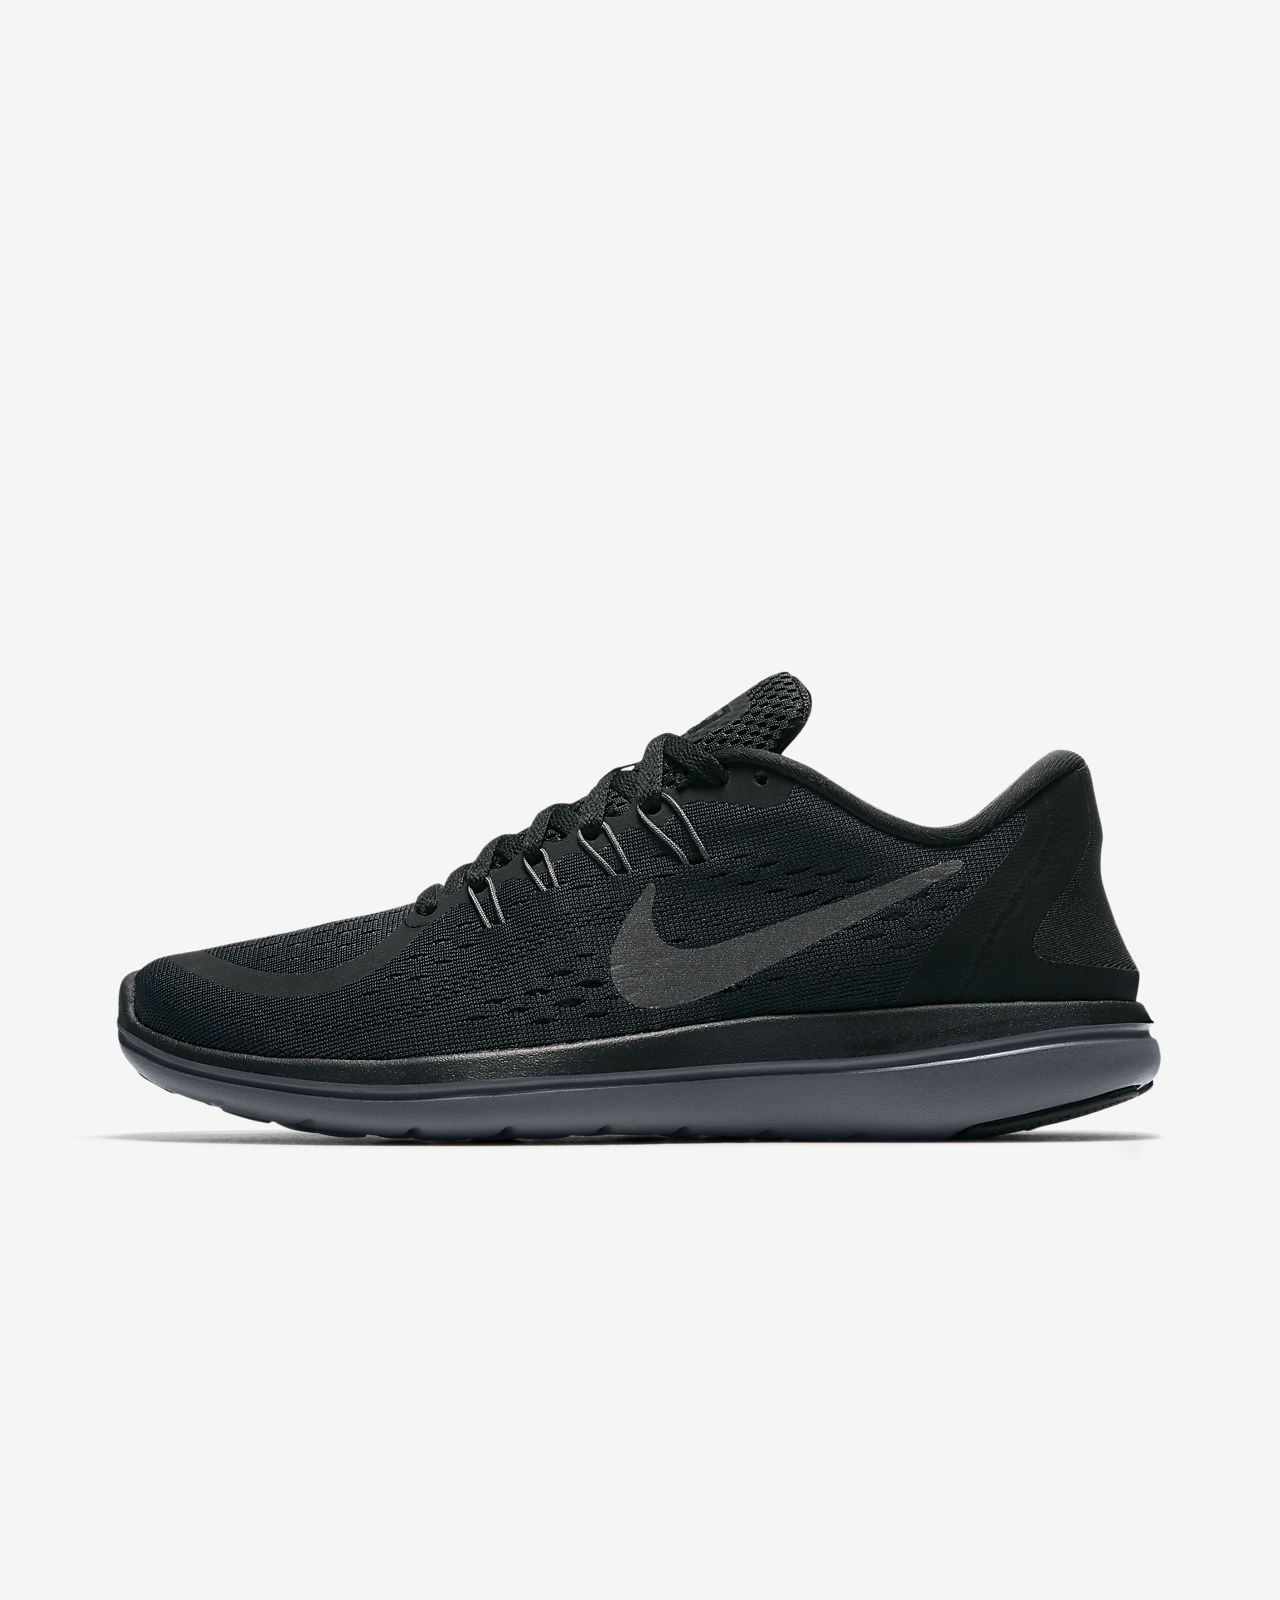 highest rated nike running shoes